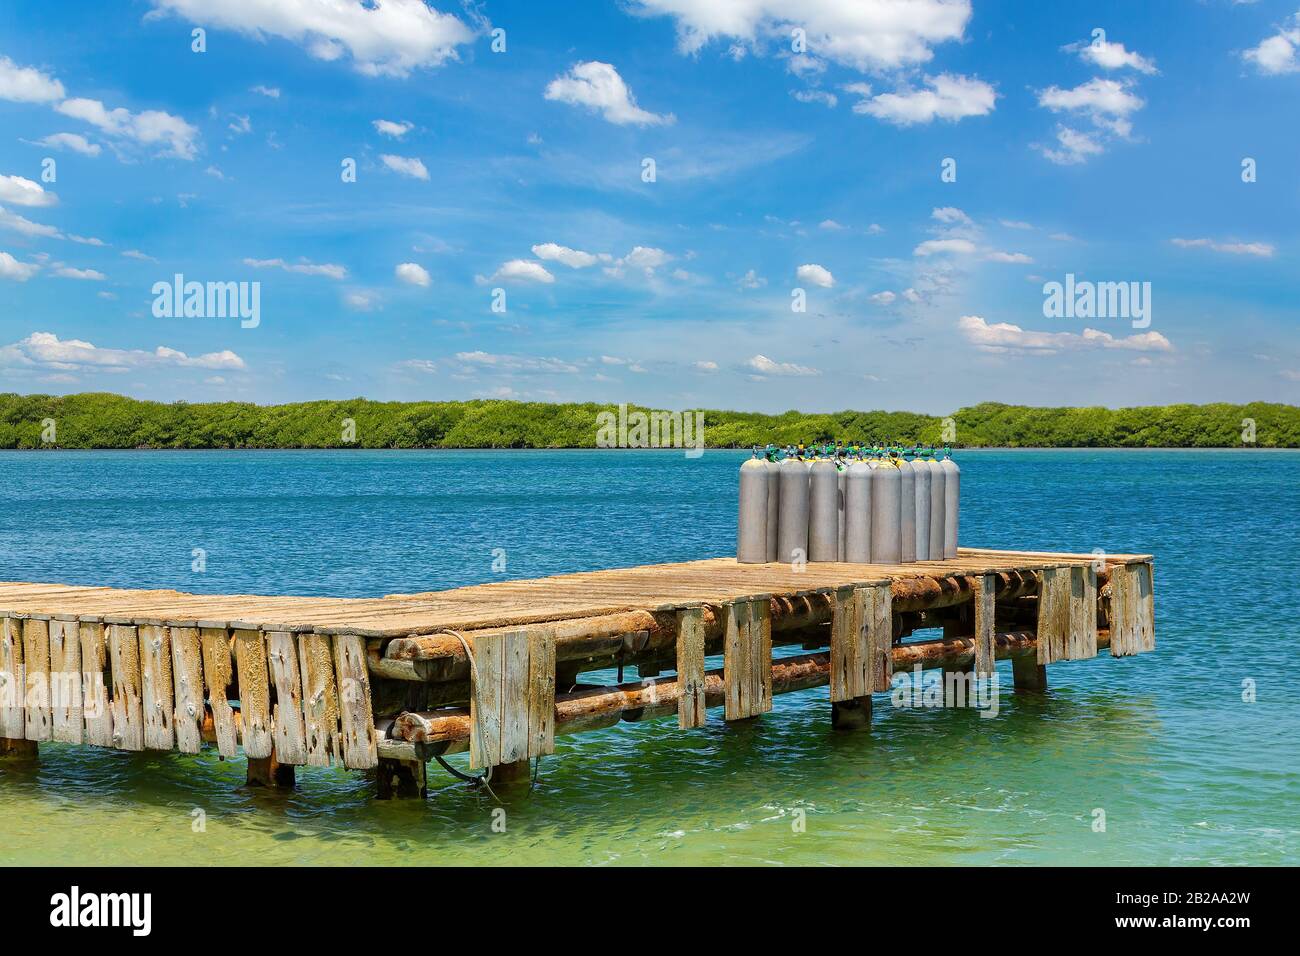 Group of air tanks standing on wooden jetty in the sea Stock Photo